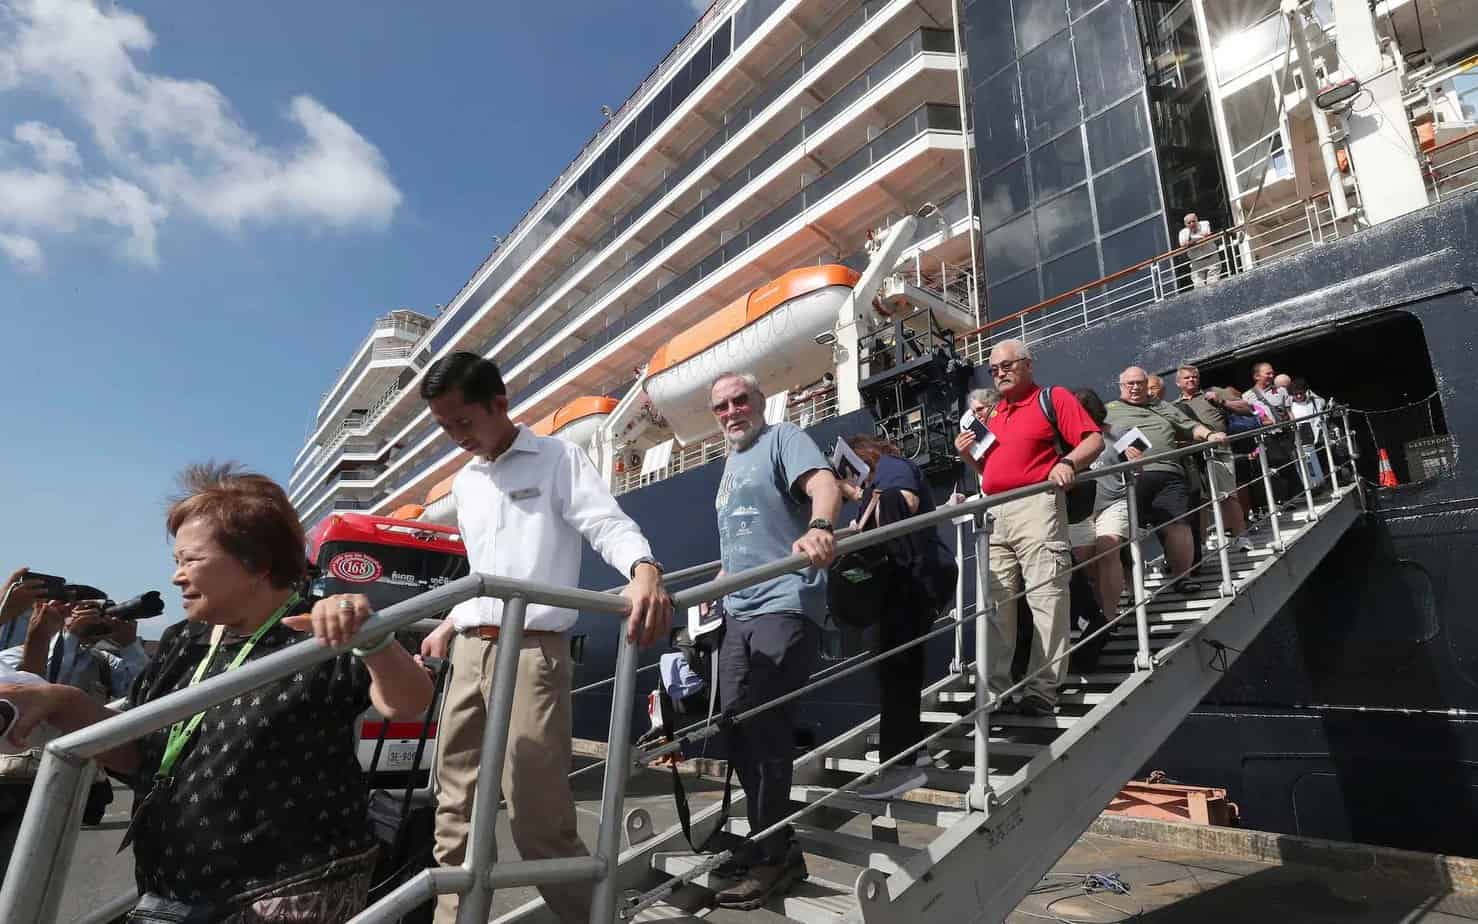 Another Carnival Cruise Ship Caught Up in Coronavirus Outbreak